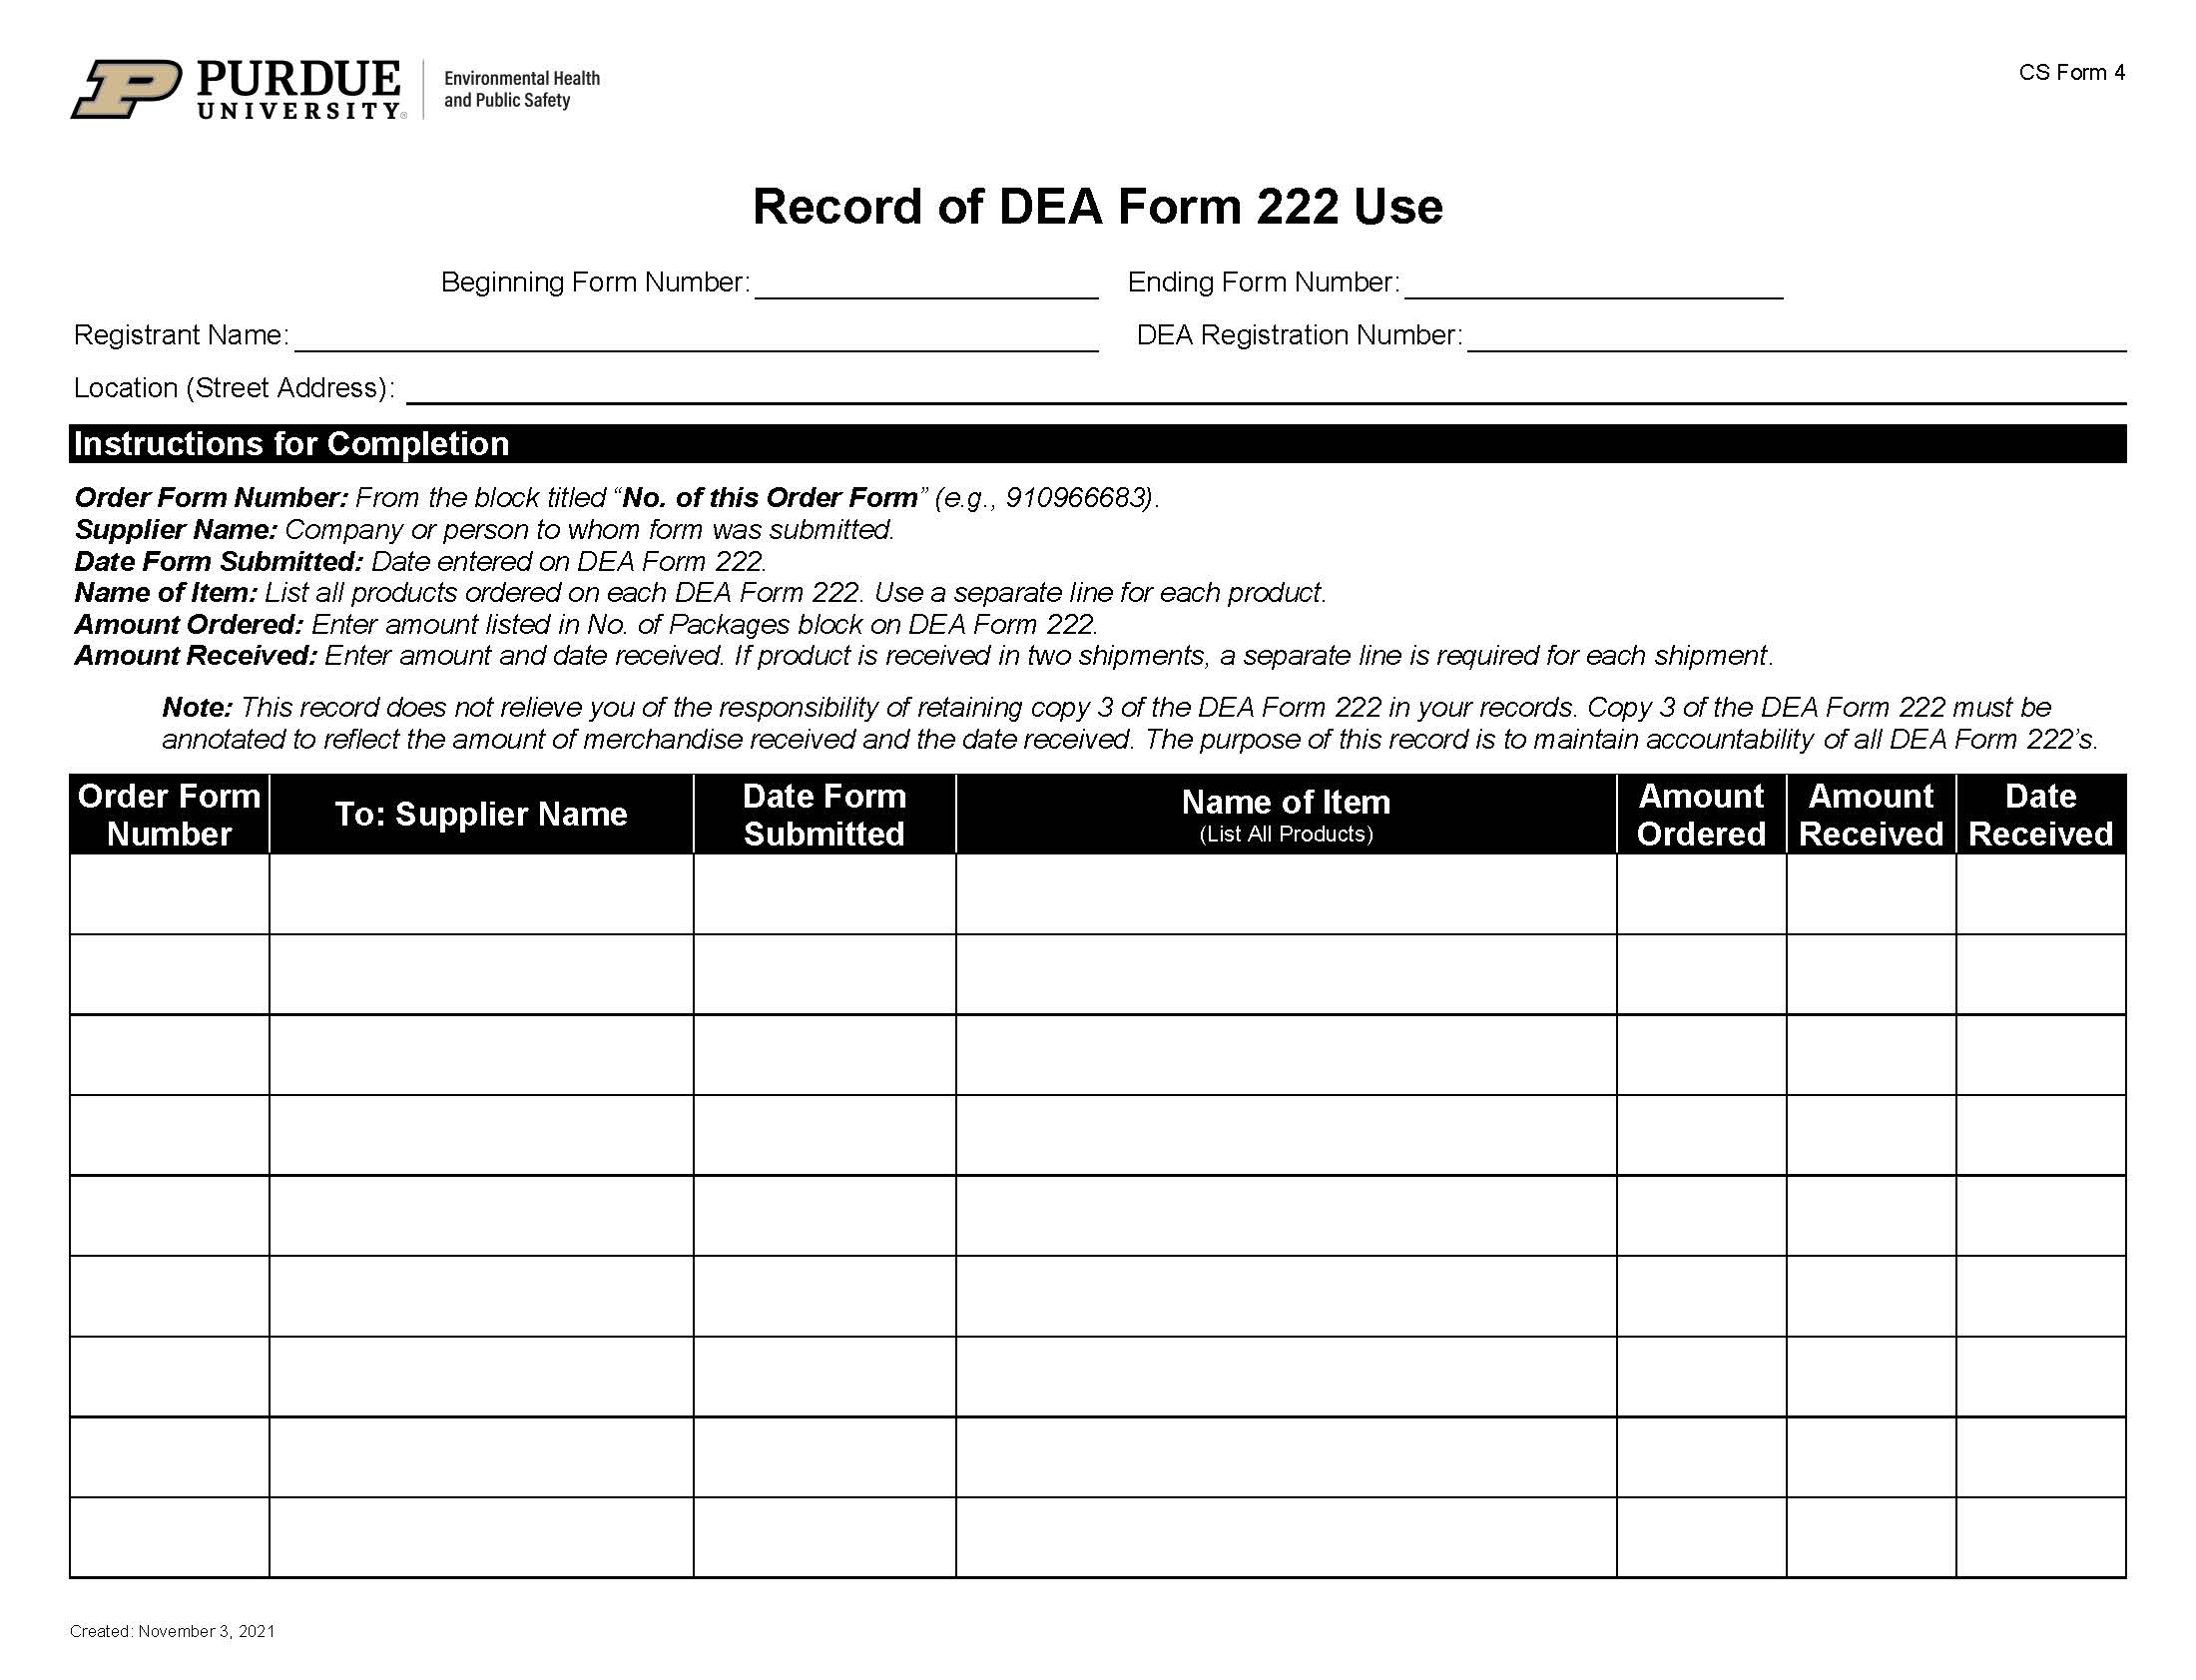 clickable link to controlled substance DEA form 222 use